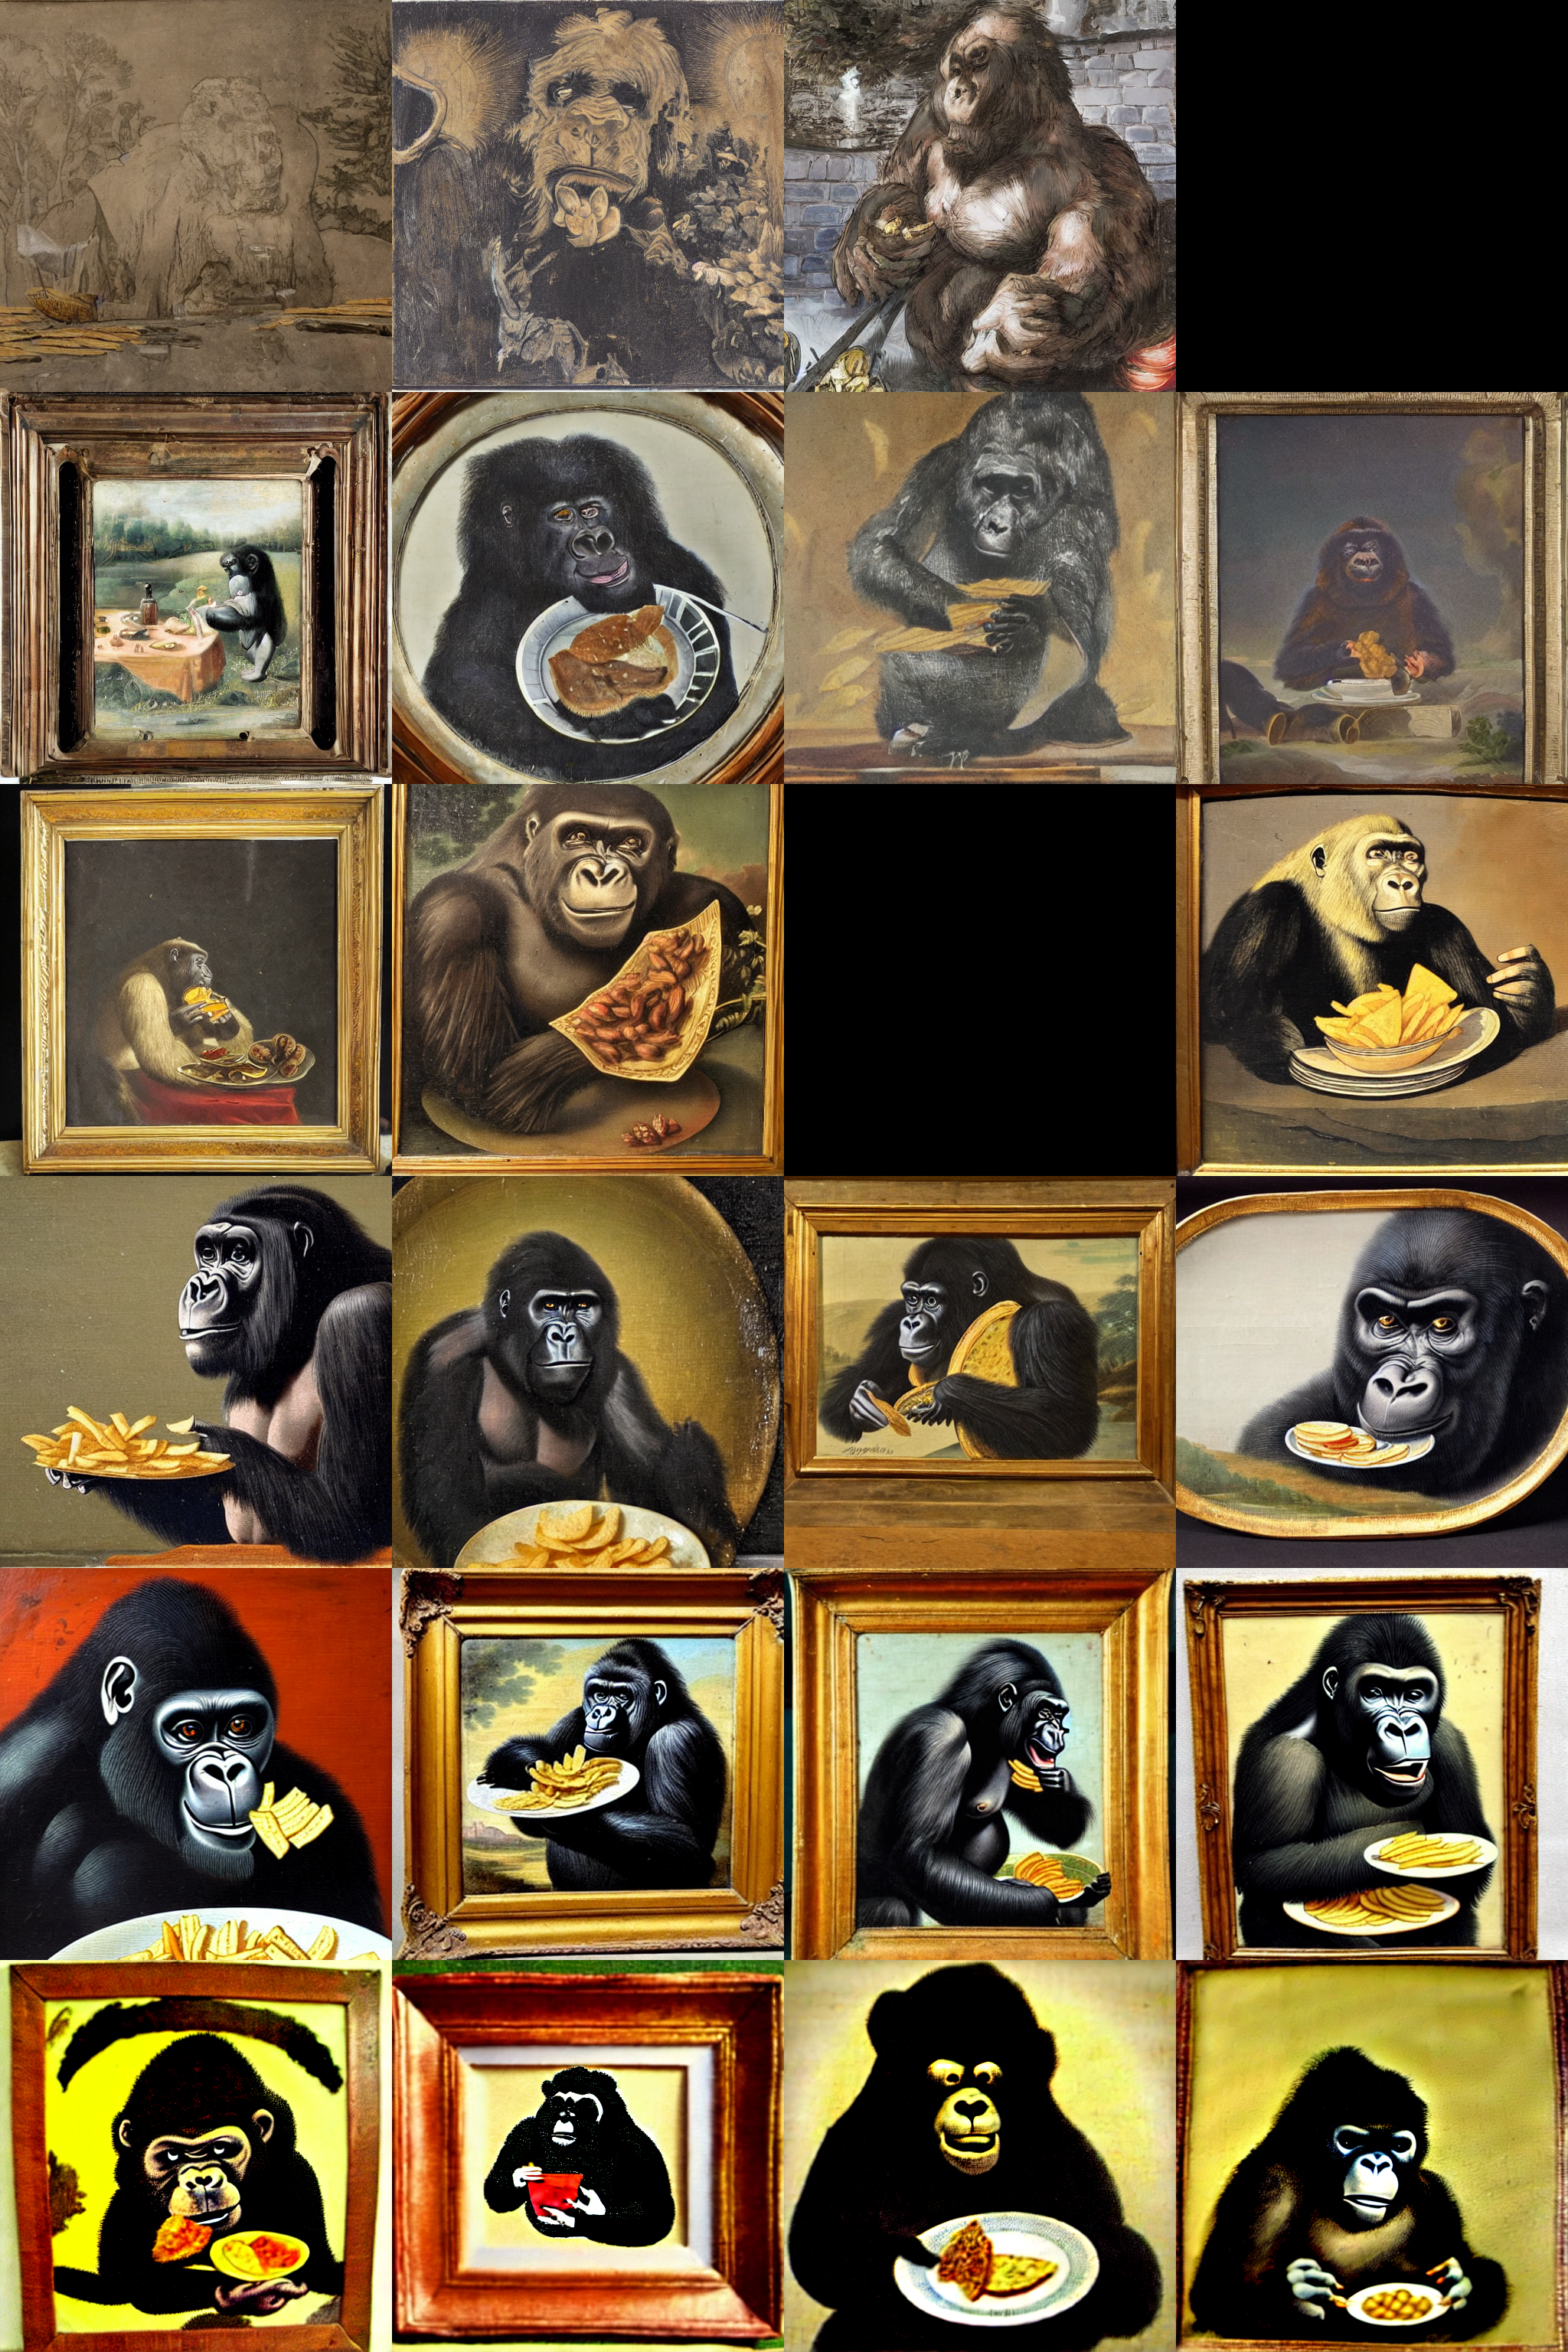 A grid of images generated from the prompt, 'An antique 18th century painting of a gorilla eating a plate of chips.' Each rows shows images generated with increased guidance.